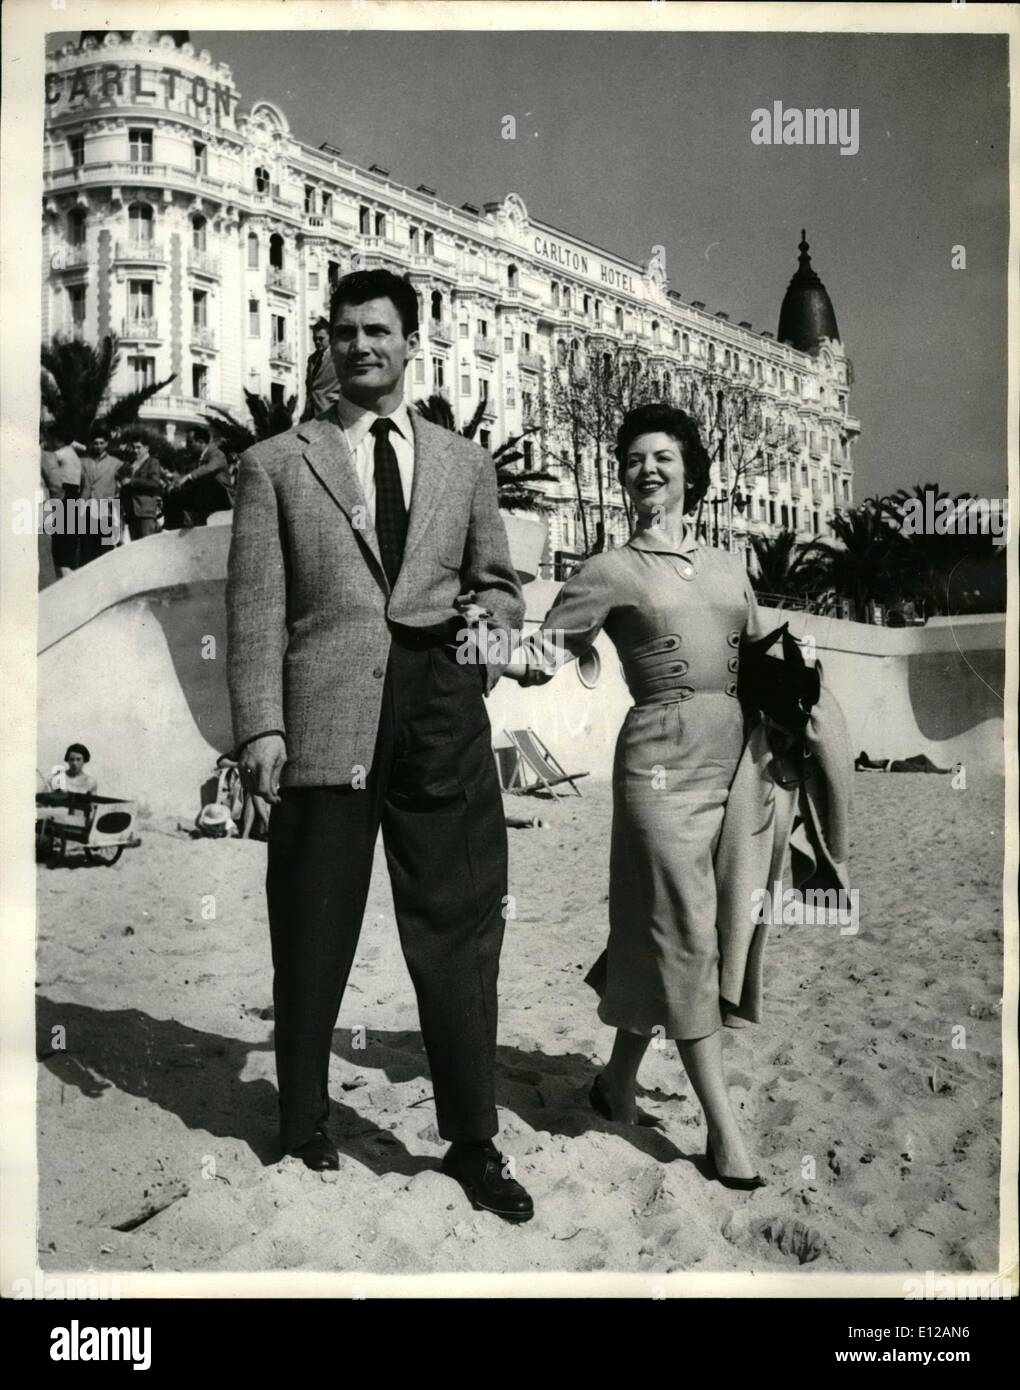 Dec. 09, 2011 - International Film Festival at Cannes. American Tough Guy and his wife. One of the most recent arrivals at Cannes for the International Film Festival was Tough Guy Jack Palance and his wife Virginia Baker a theatrical artist who says she leaves the acting to Jack. Keystone Photo Shows: Jack Palance and his wife on the beach at Cannes. Stock Photo